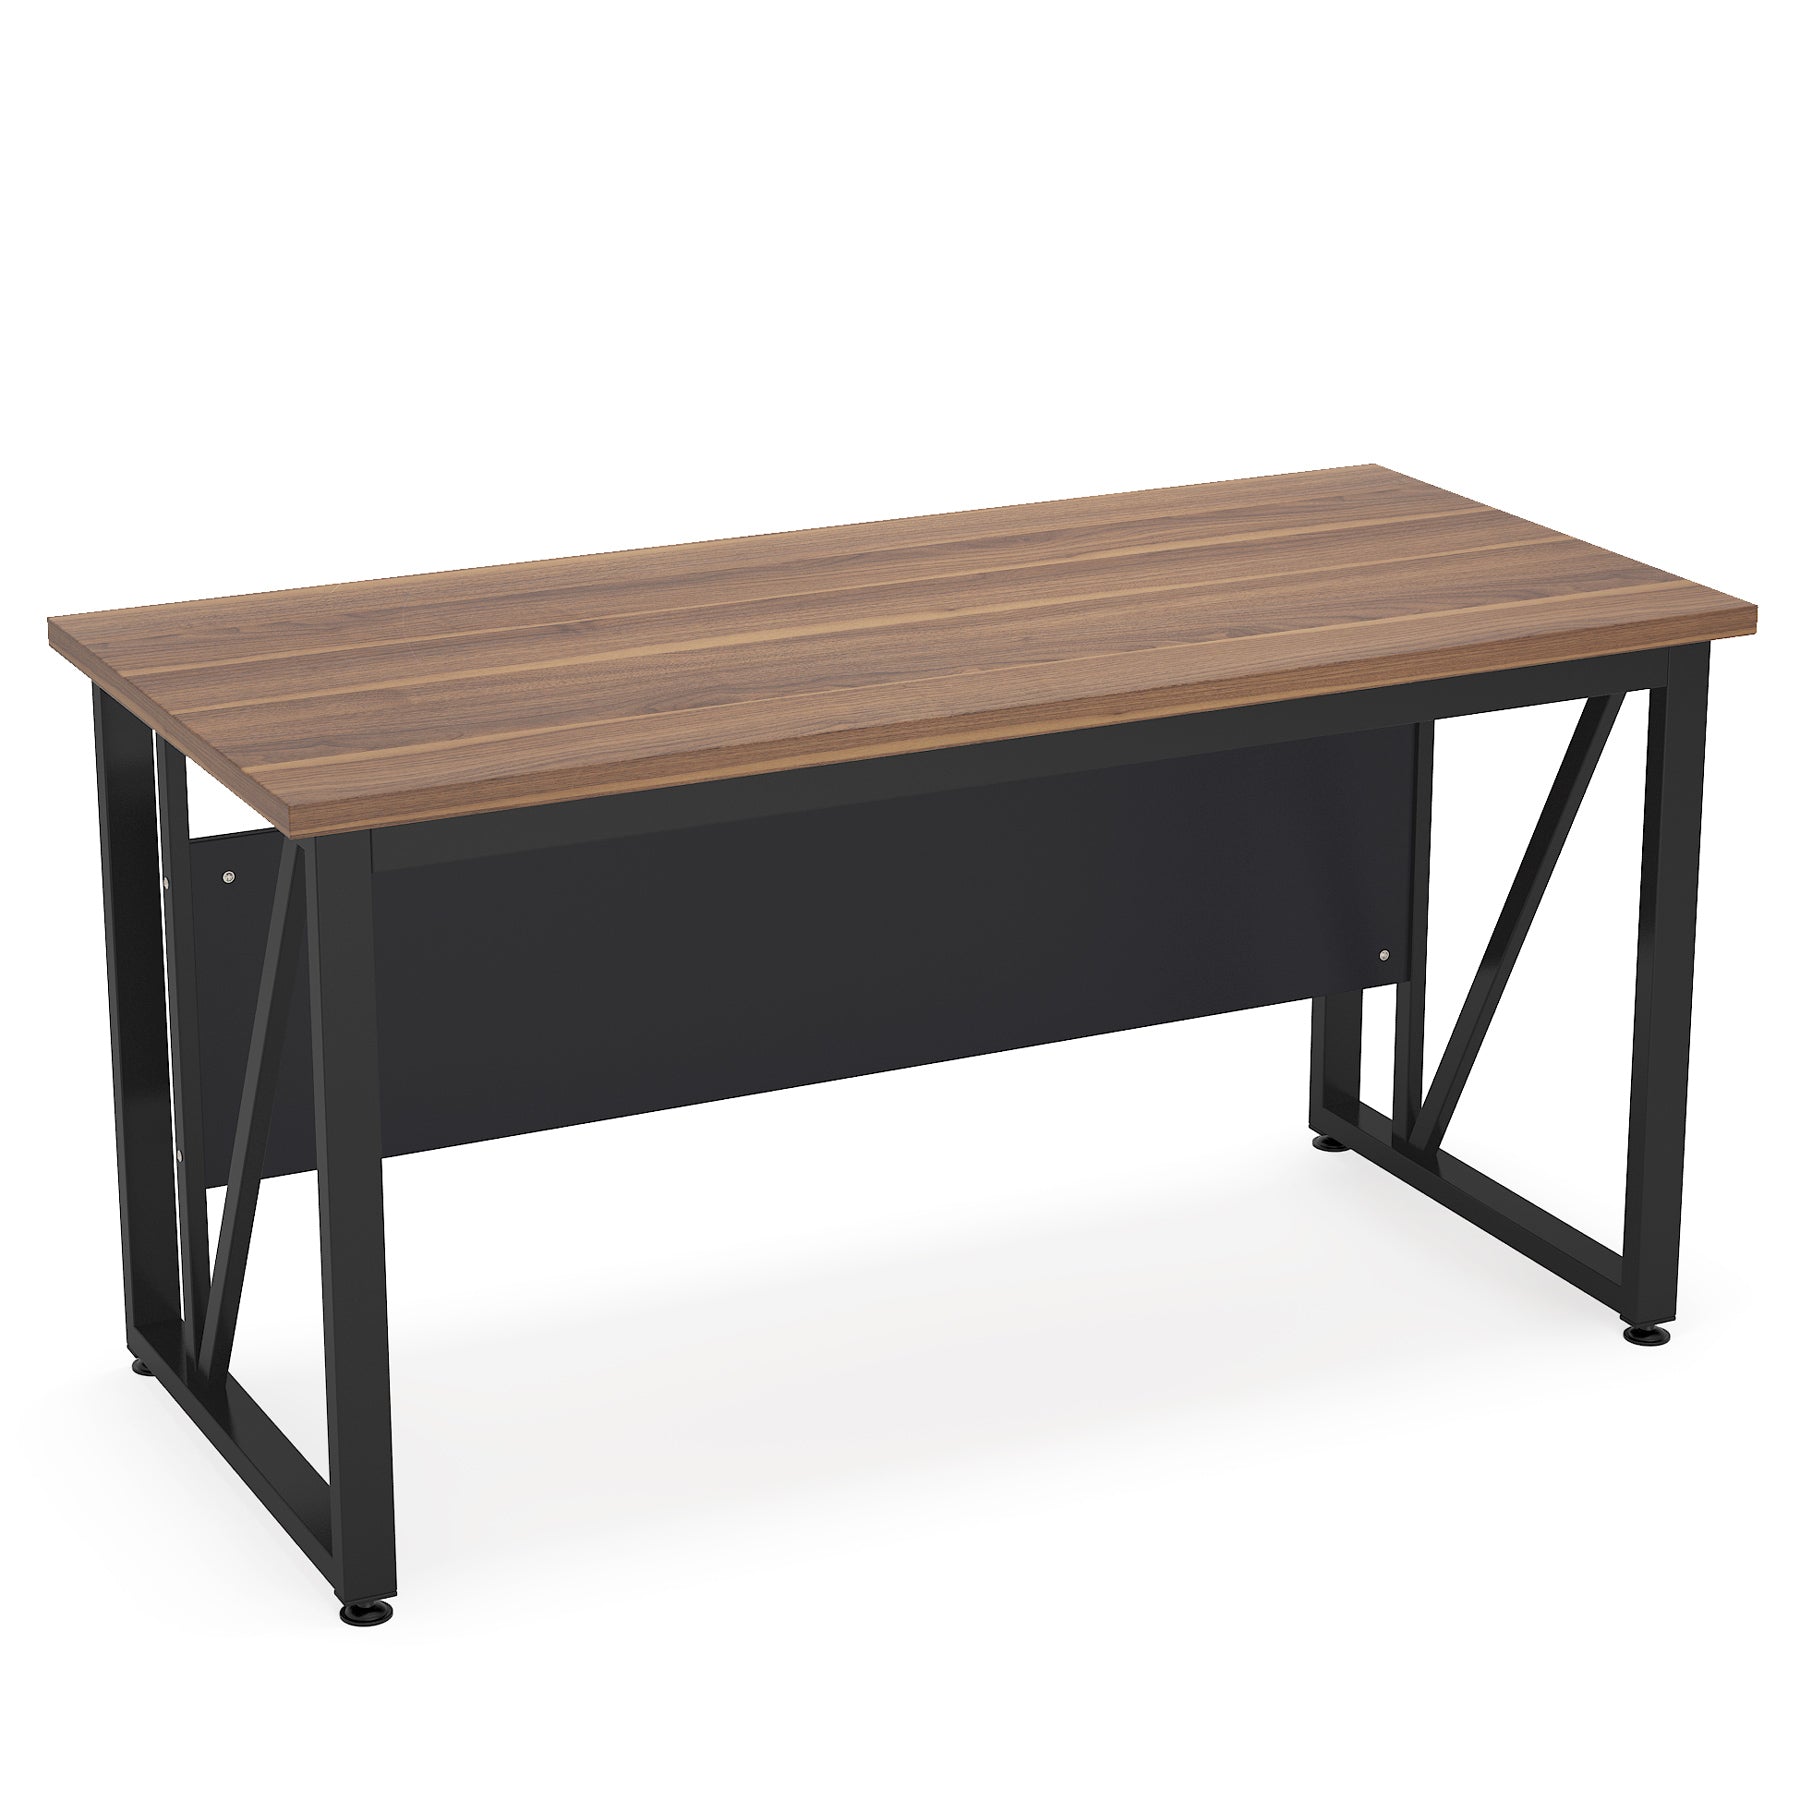 Tribesigns 55 inches Computer Desk Home Office Desk Writing Table